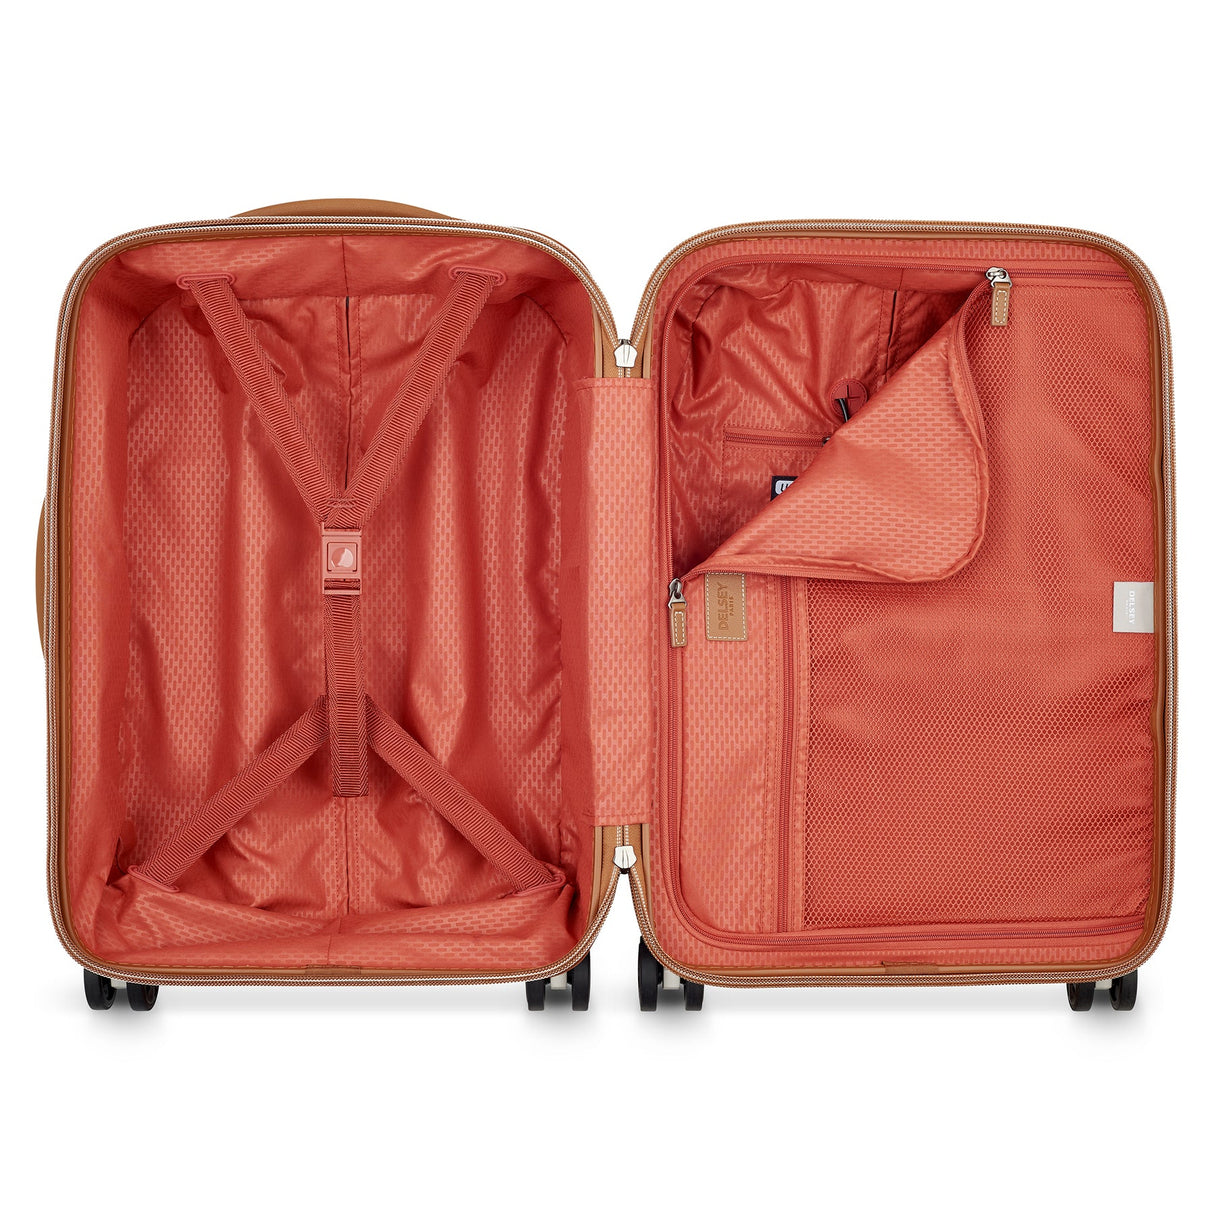 Delsey Chatelet Air 2.0 Carry-On Spinner , , delsey-chatelet-air-2.0-40167680515-07_1800x1800_9290a95c-10af-4a5b-b921-6d9396e1c125